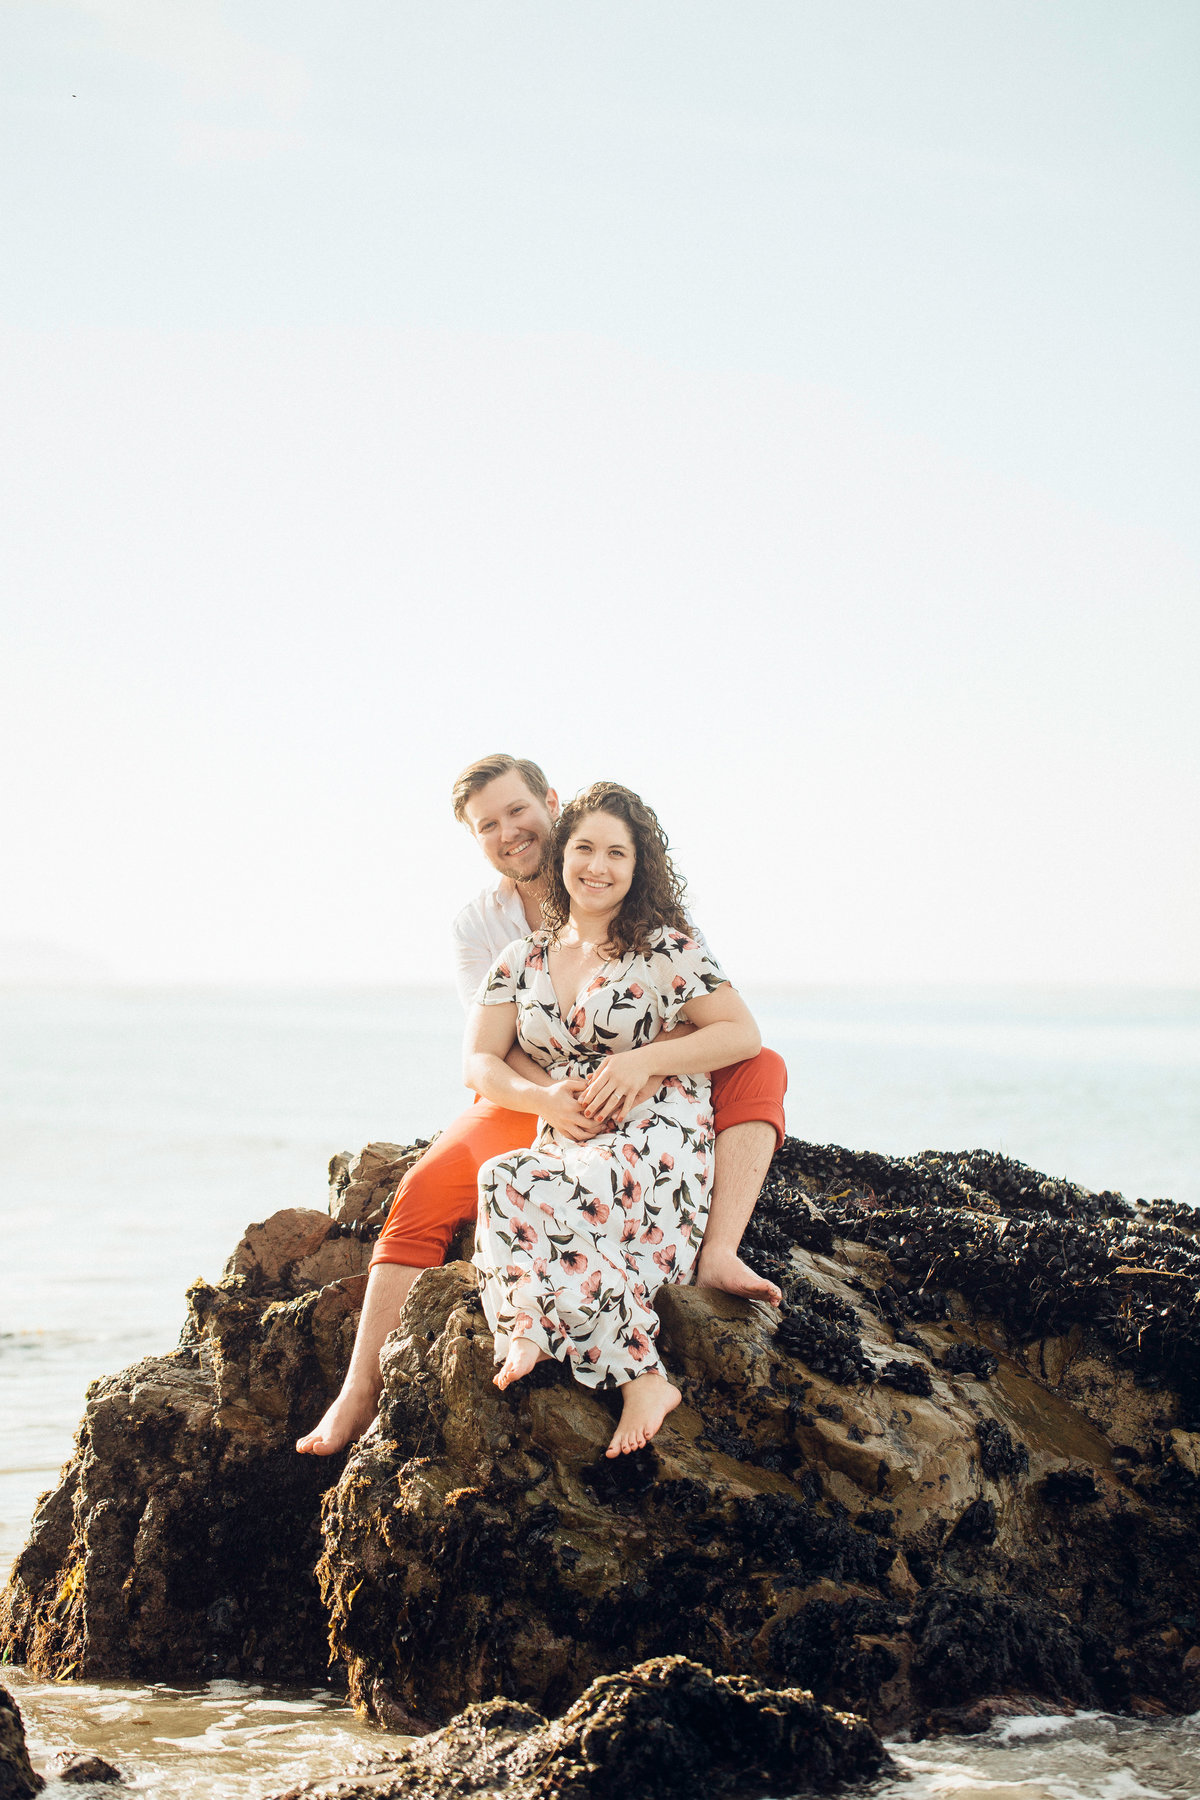 Engagement Photograph Of  Man Hugging a Woman From The Back While Seated On a Rock Los Angeles